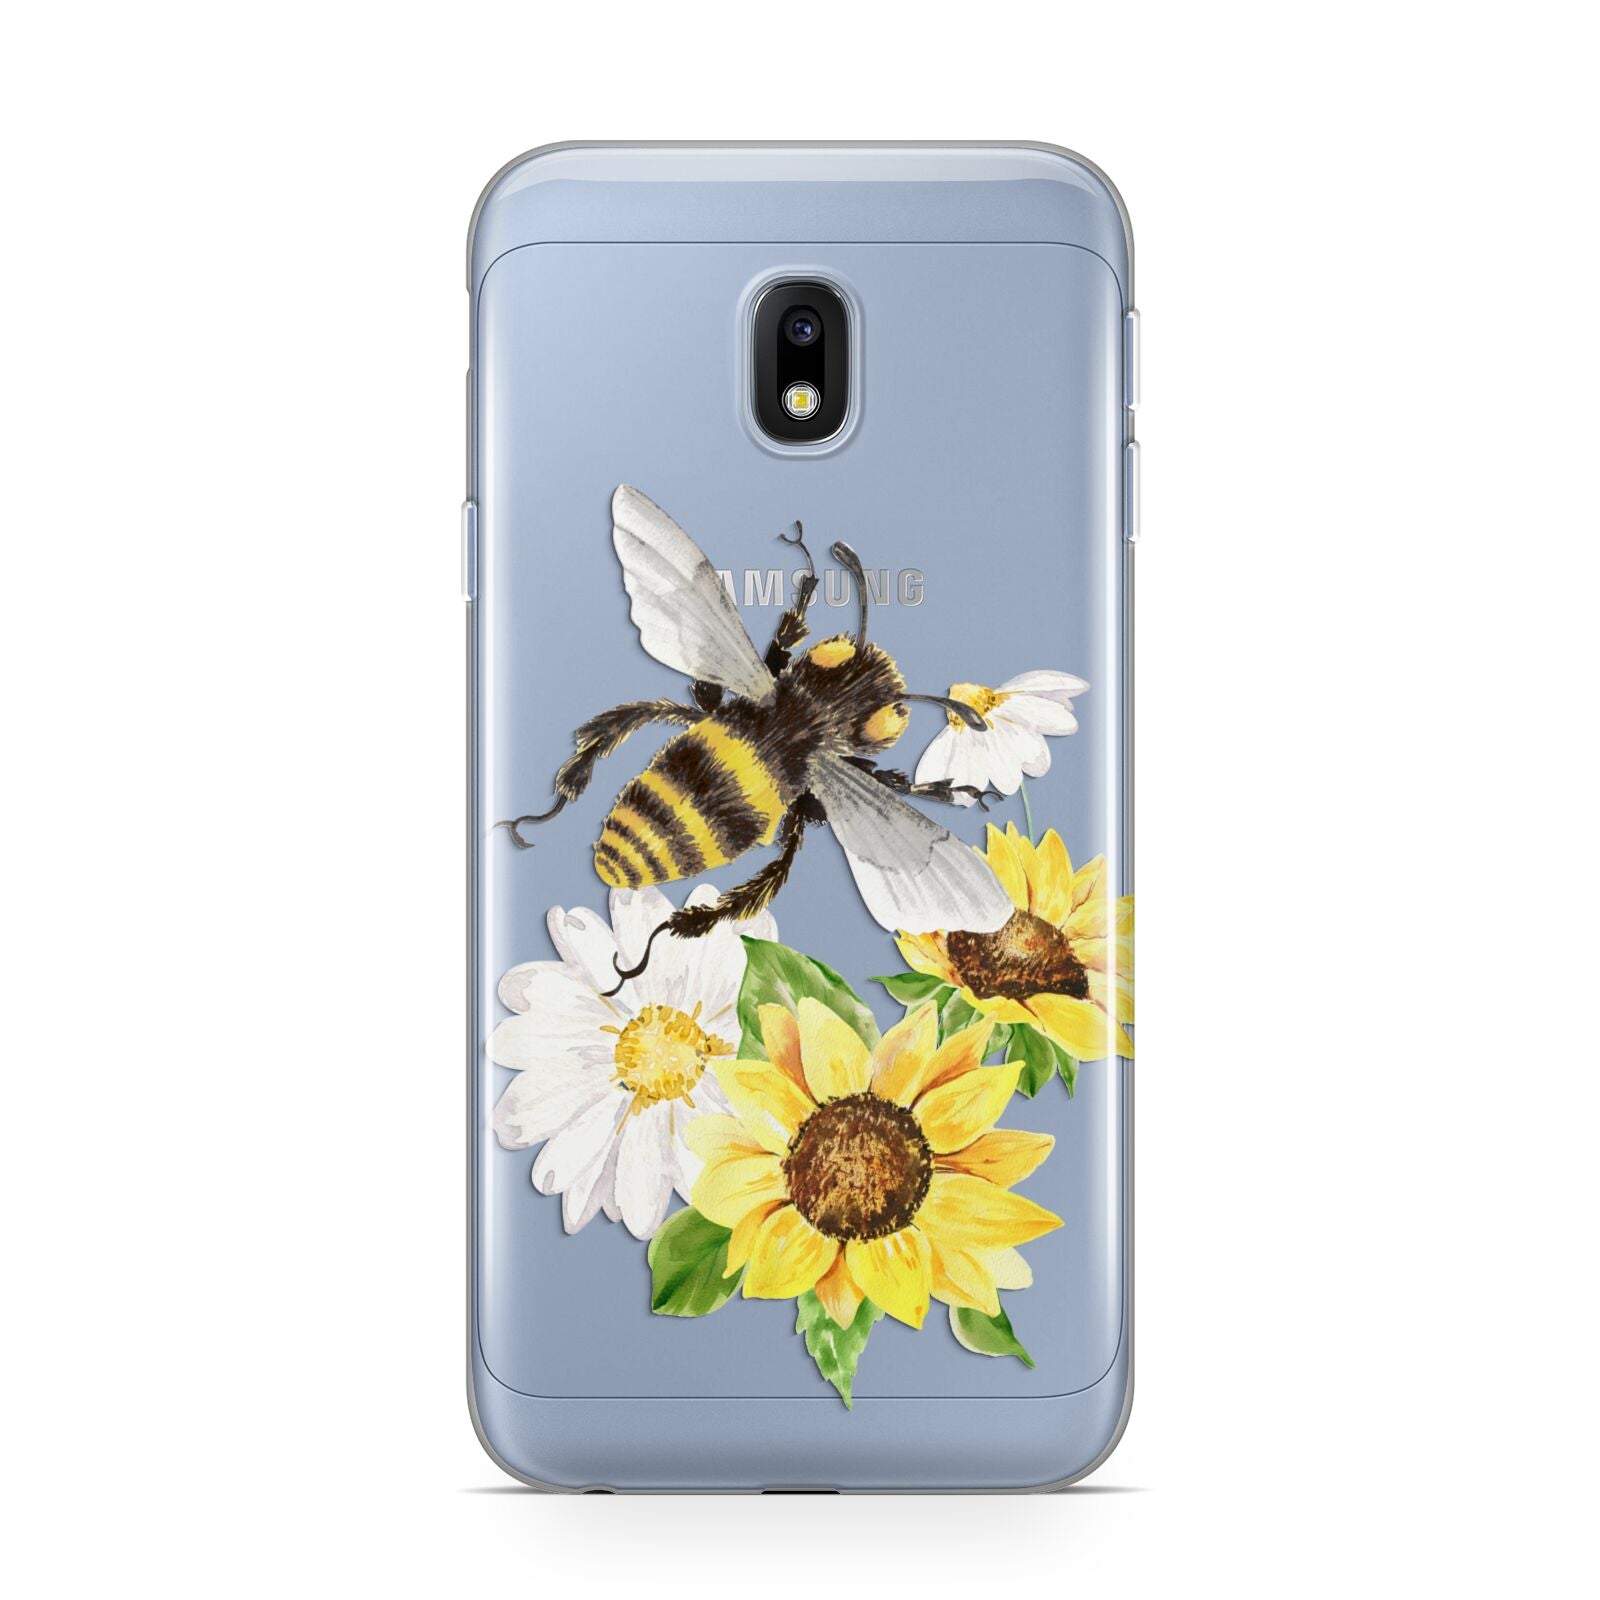 Watercolour Bee and Sunflowers Samsung Galaxy J3 2017 Case